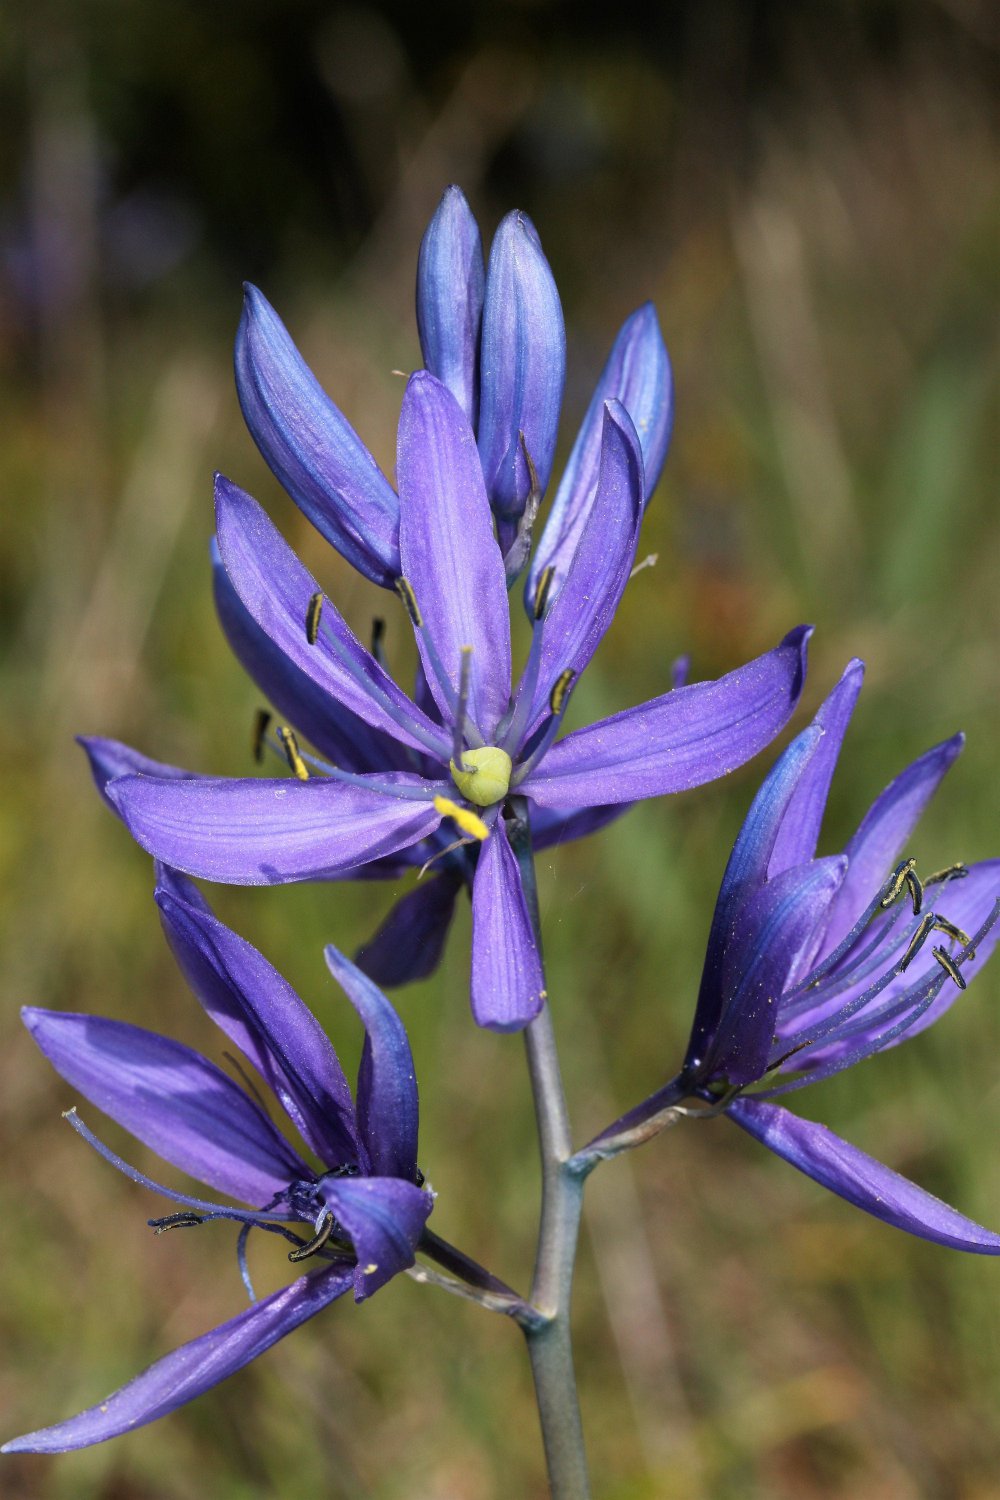 Super Growth 30 seeds blue Camas Lily Wild Indian Hyacinth